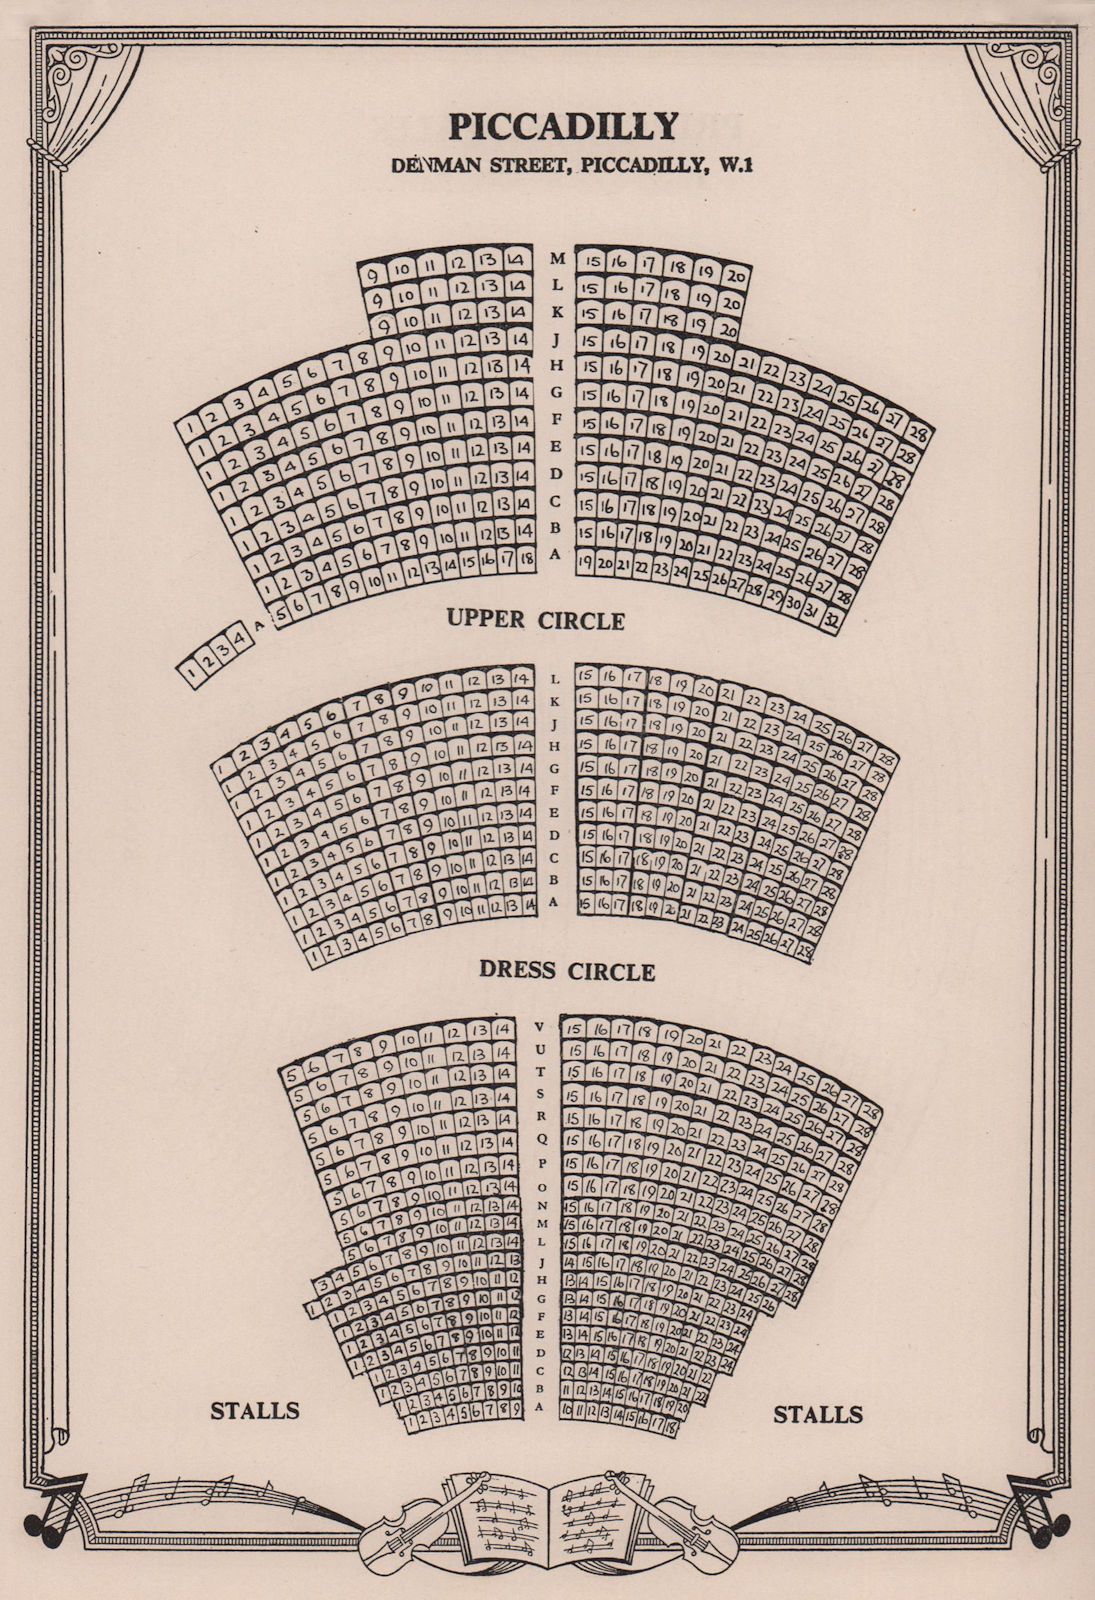 Piccadilly Theatre, Denman St, Picc. Circus, London. Vintage seating plan 1955